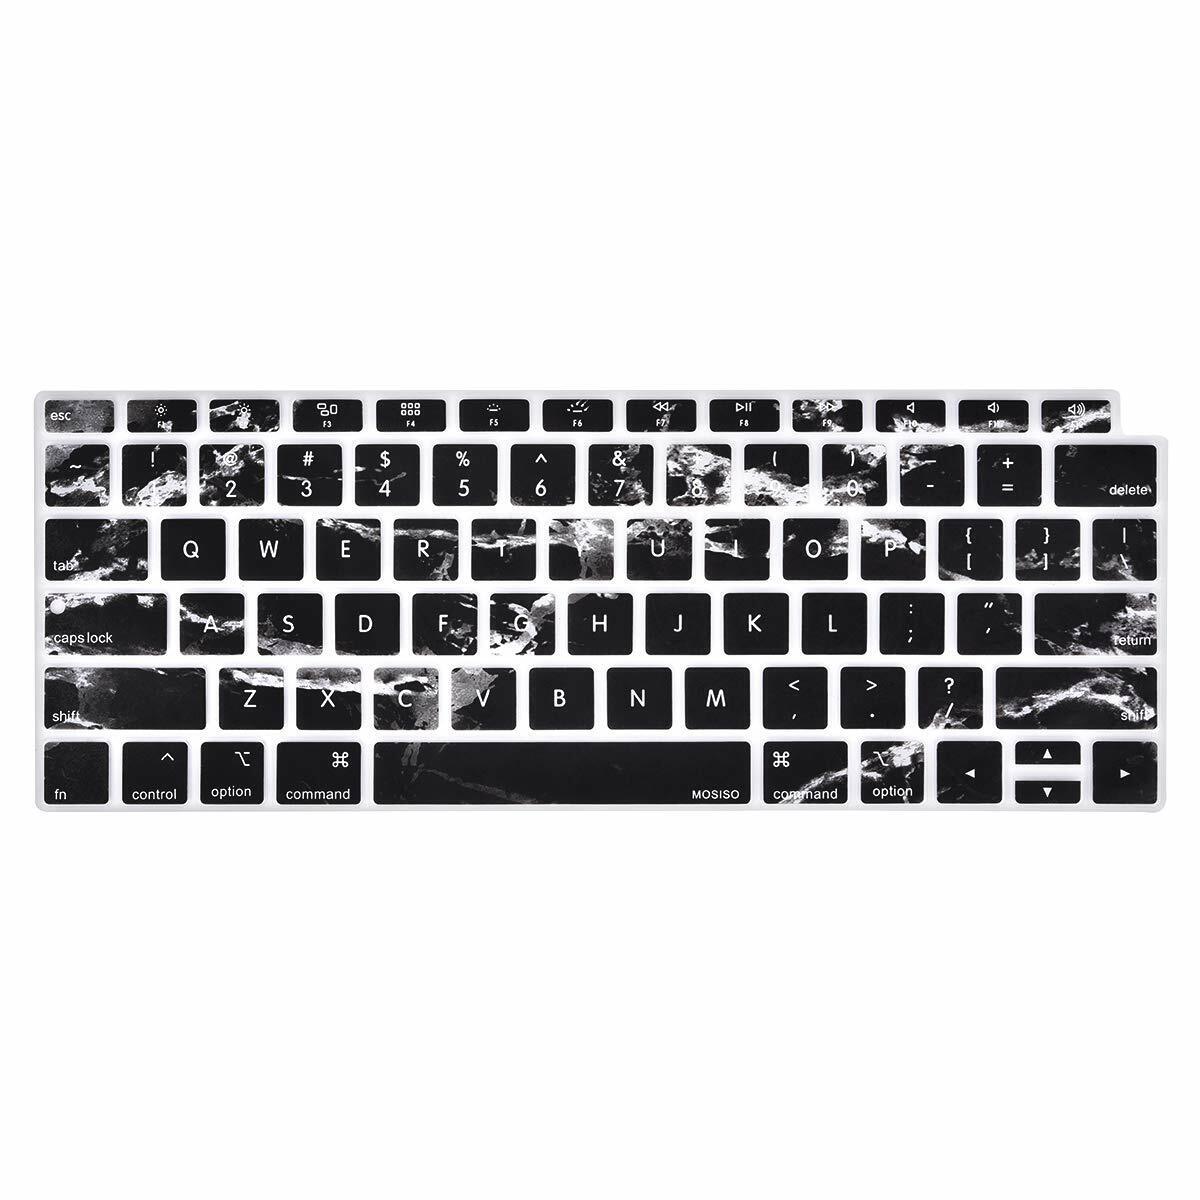 Waterproof Silicone Keyboard Protective for Macbook Air 13 2018 Release A1932 